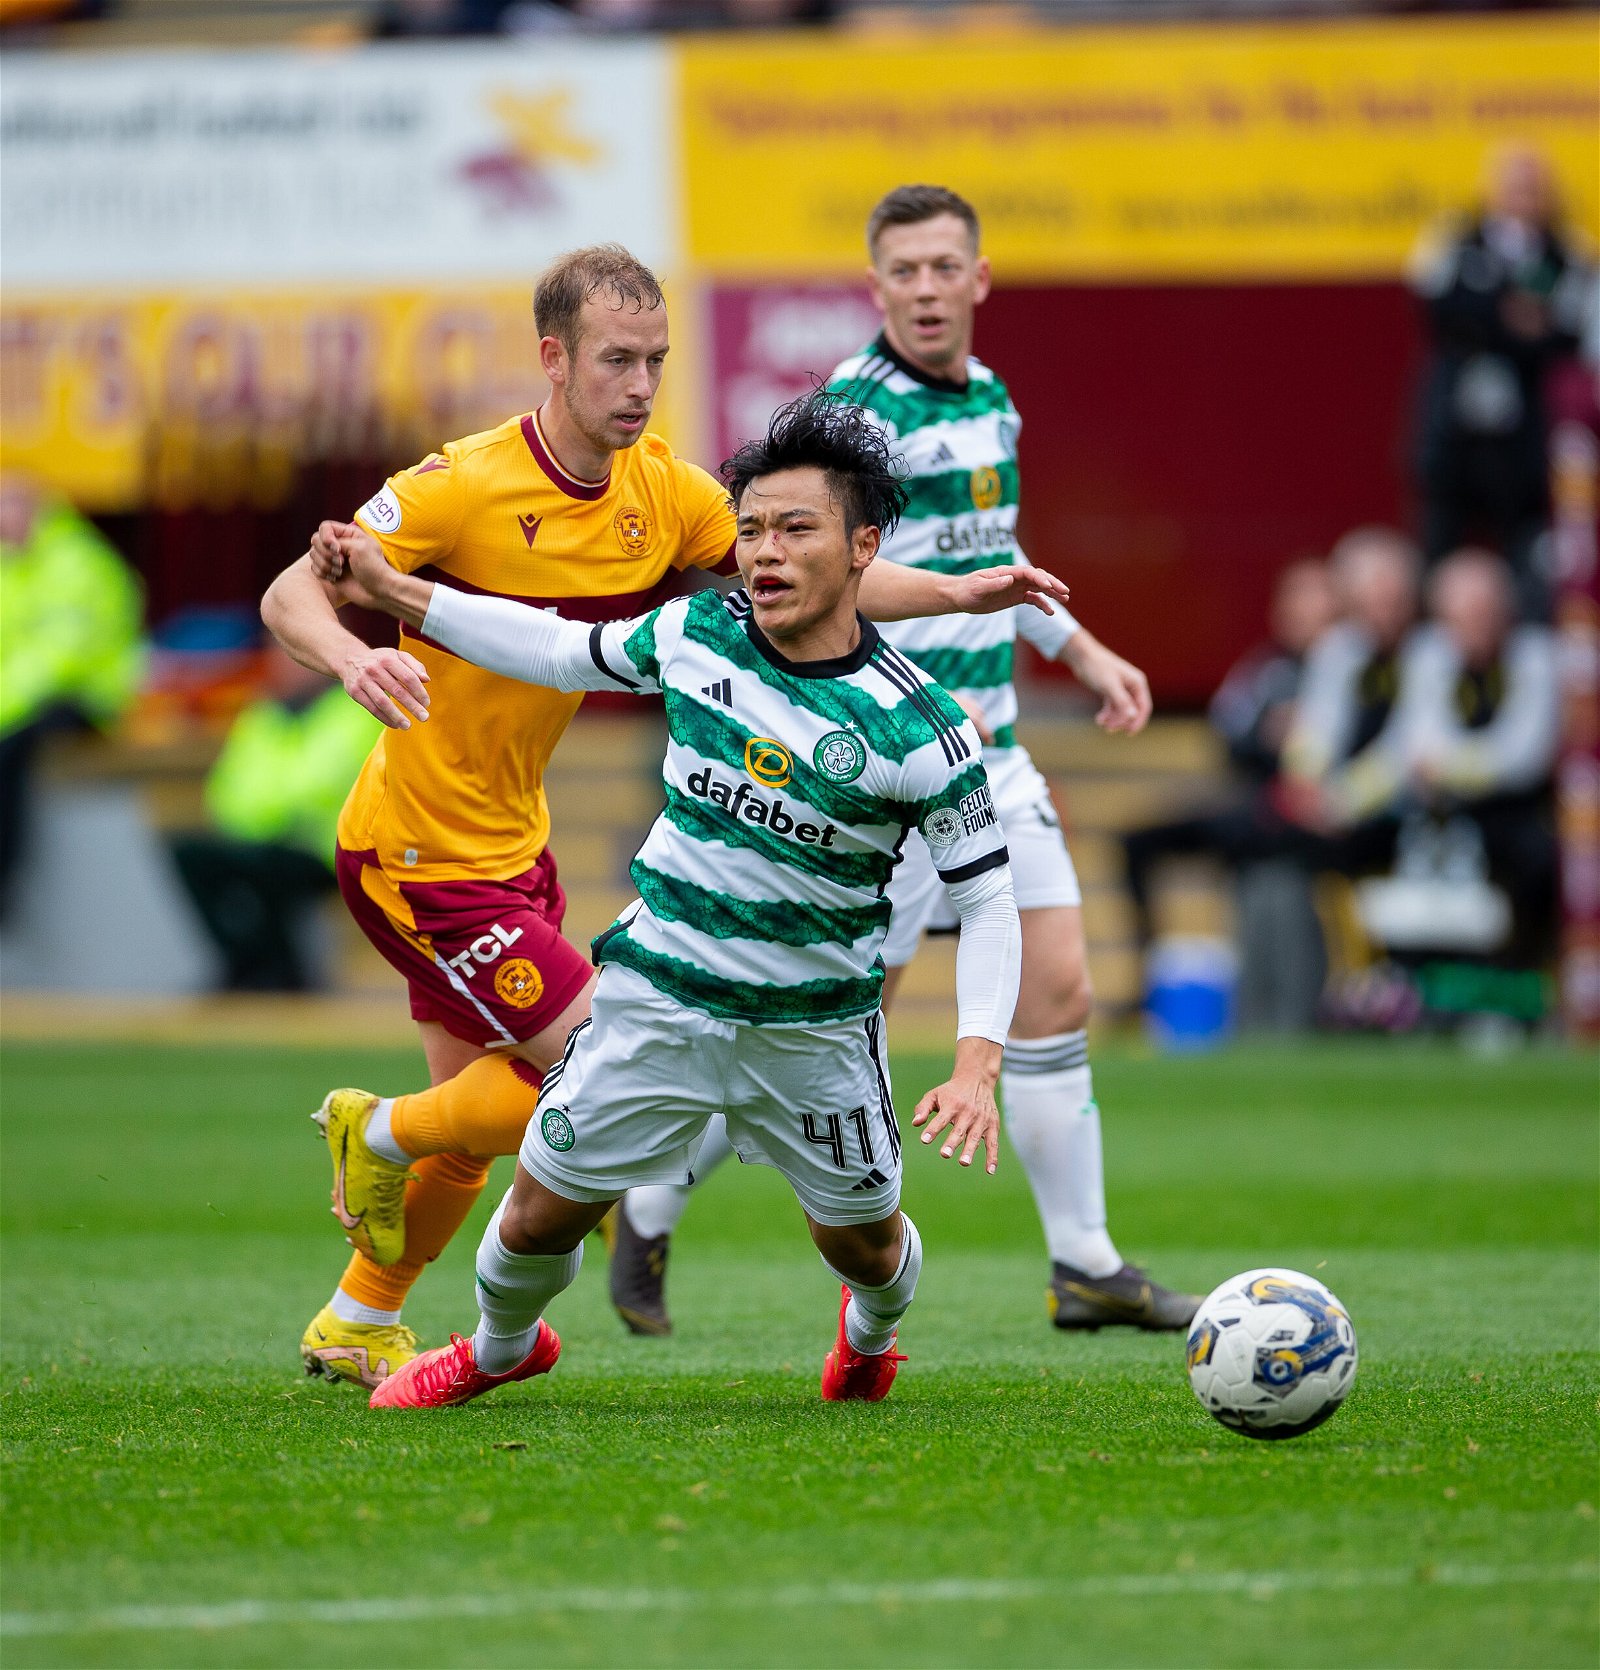 Watch Brilliant Post-Match Scenes As Celtic Defeat Motherwell Latest Celtic News